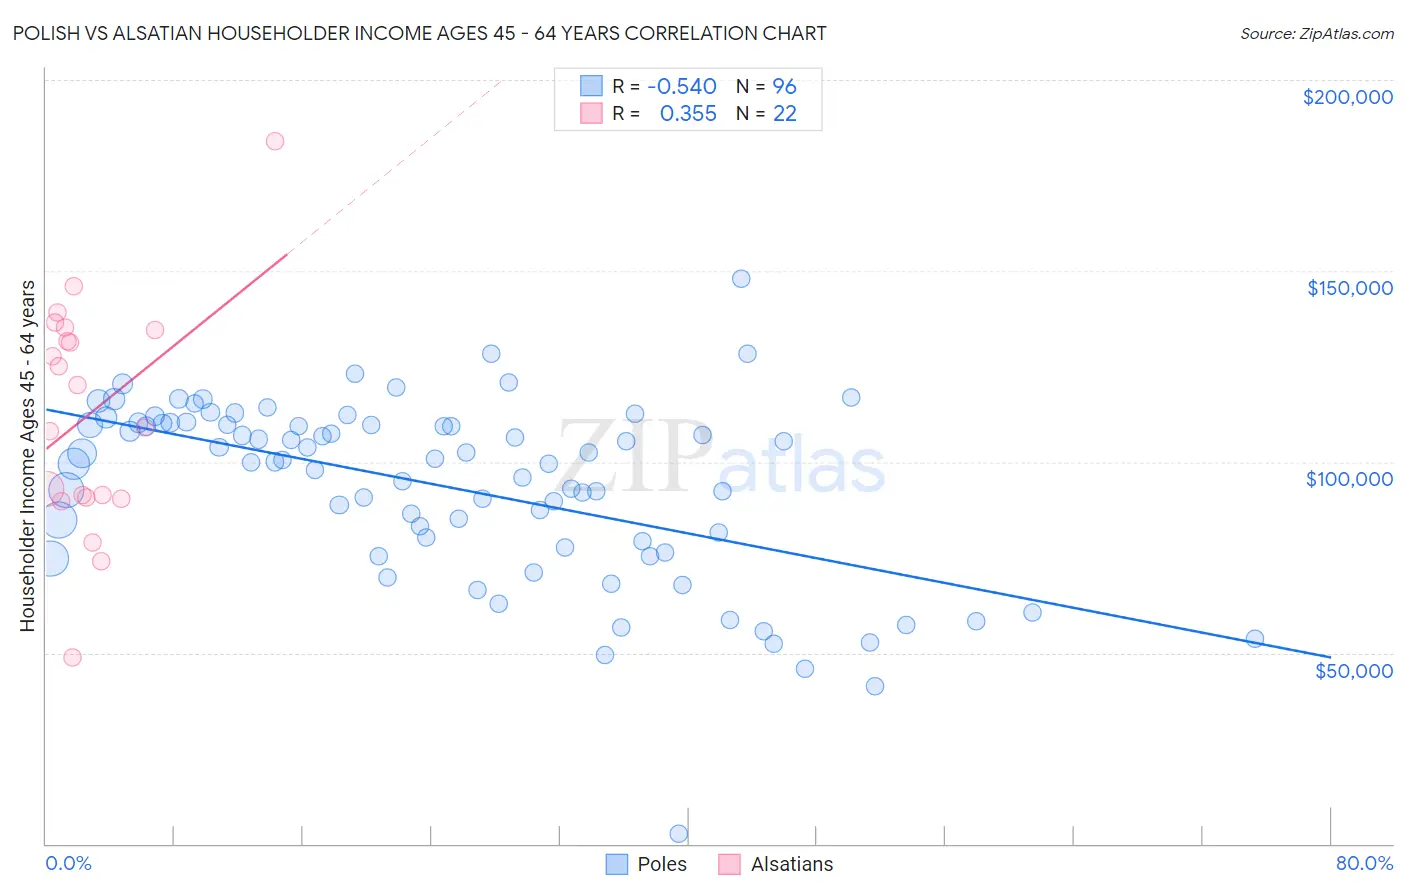 Polish vs Alsatian Householder Income Ages 45 - 64 years